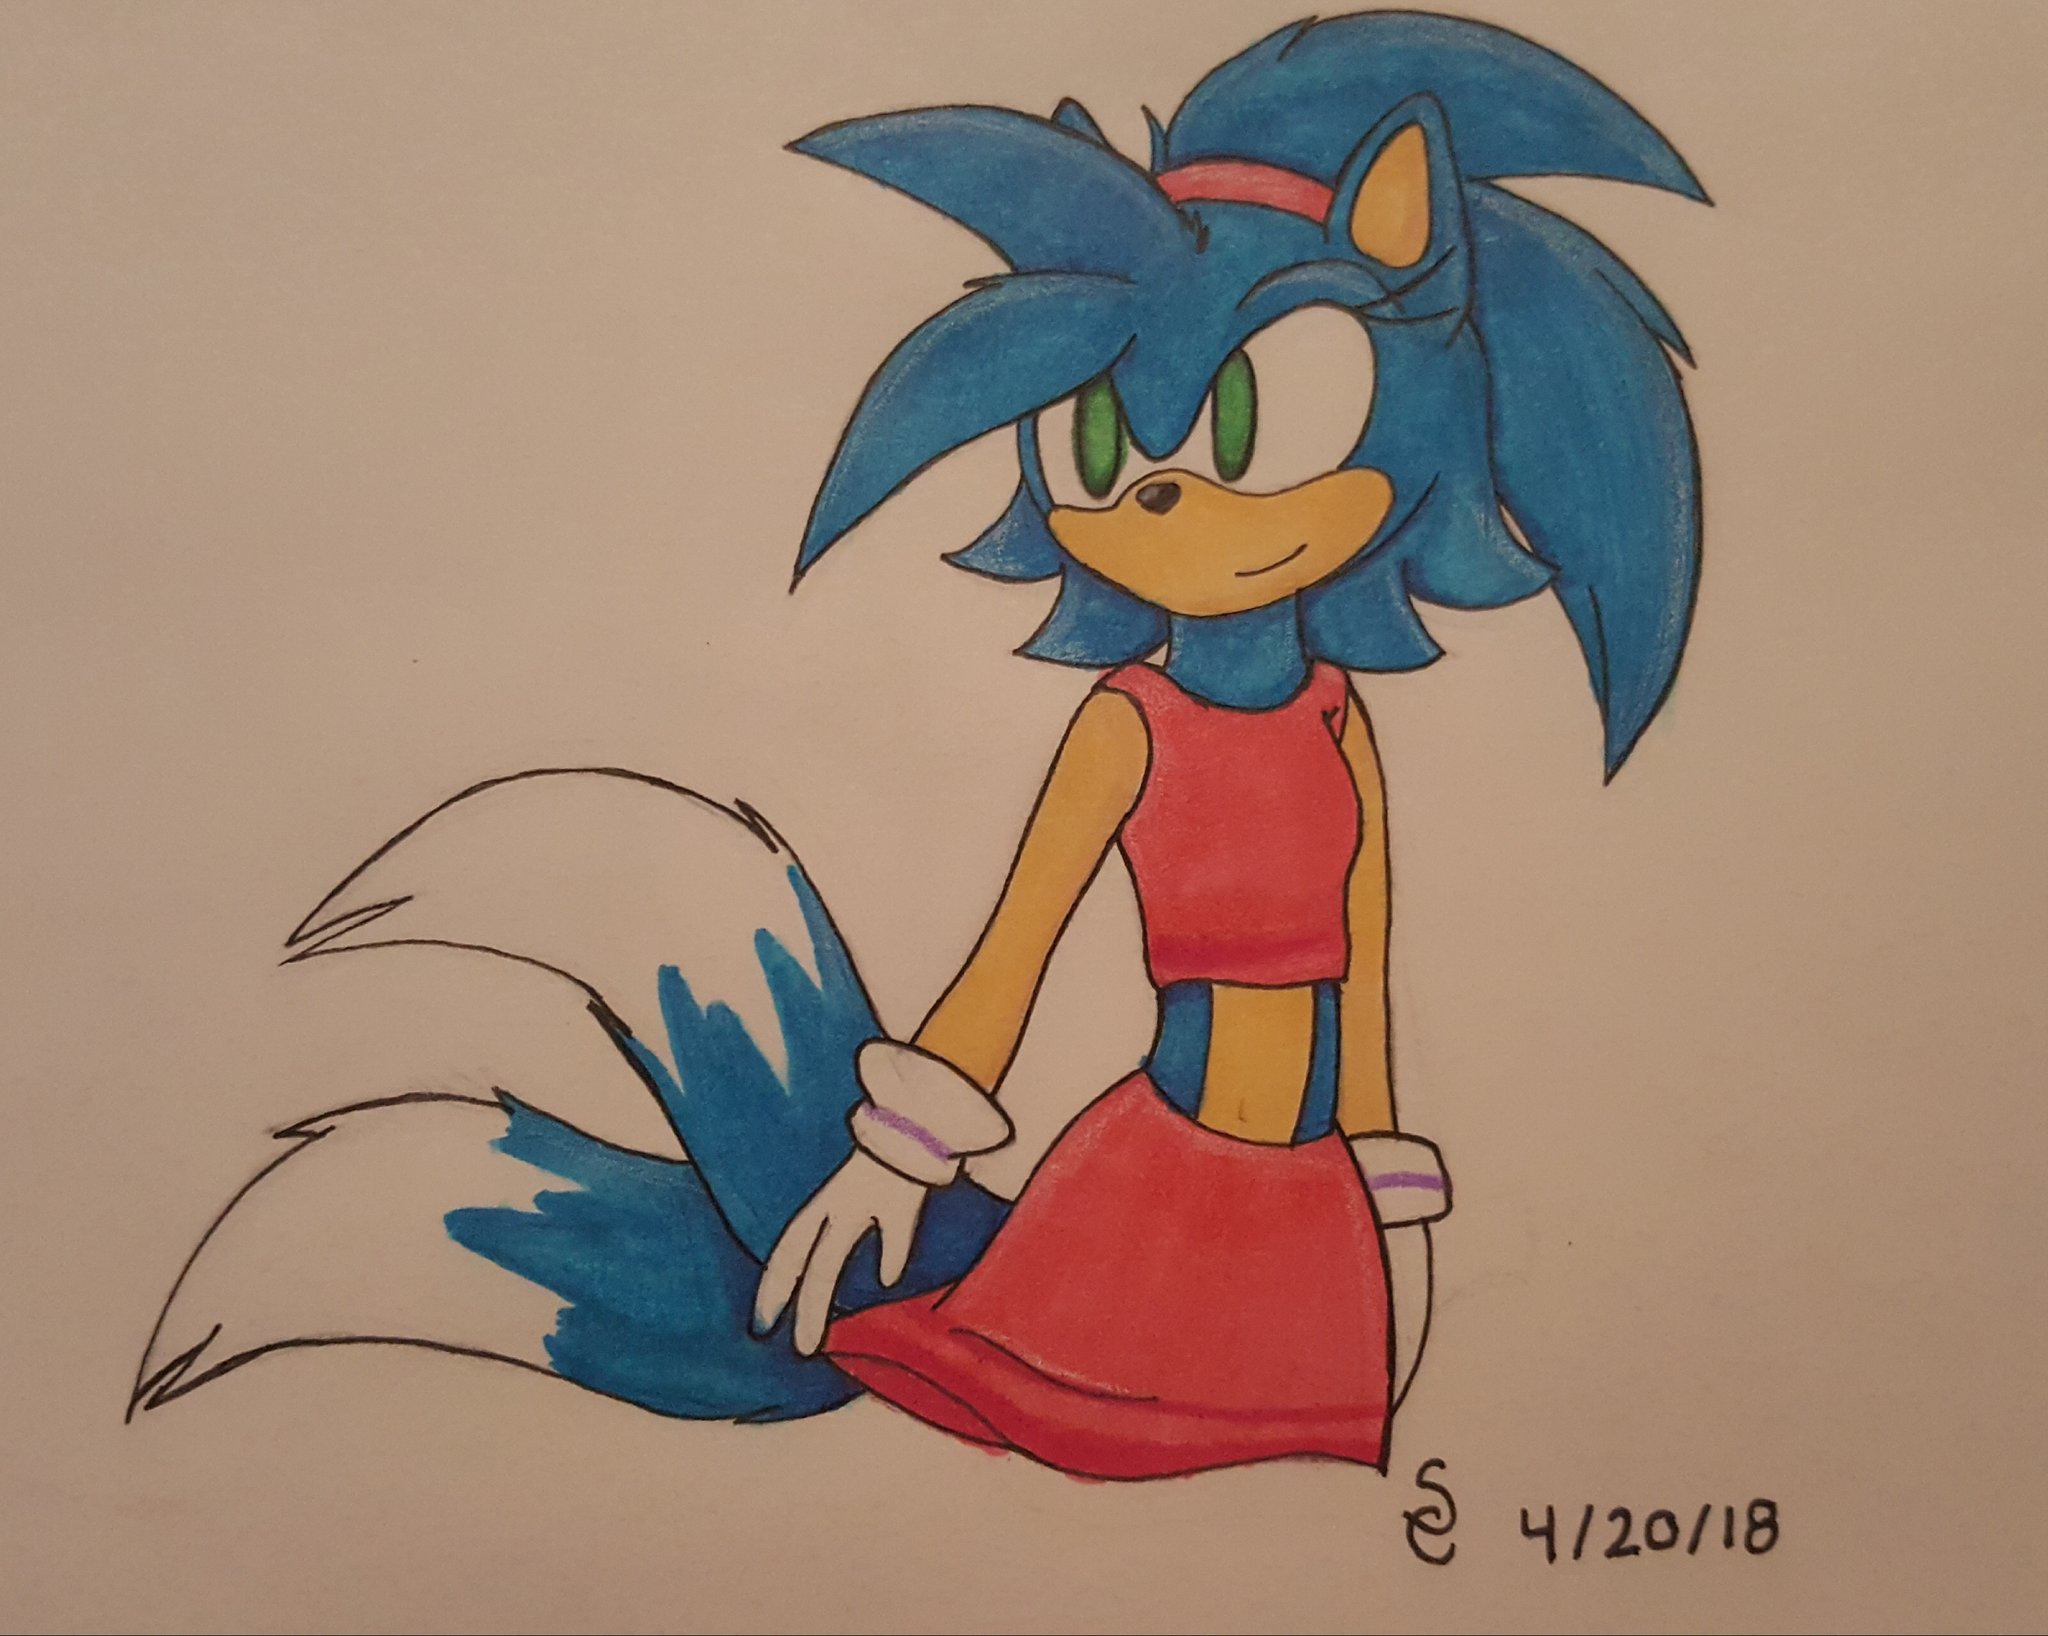 Sonic got a Tails Doll by Snowpaw1 - Fanart Central